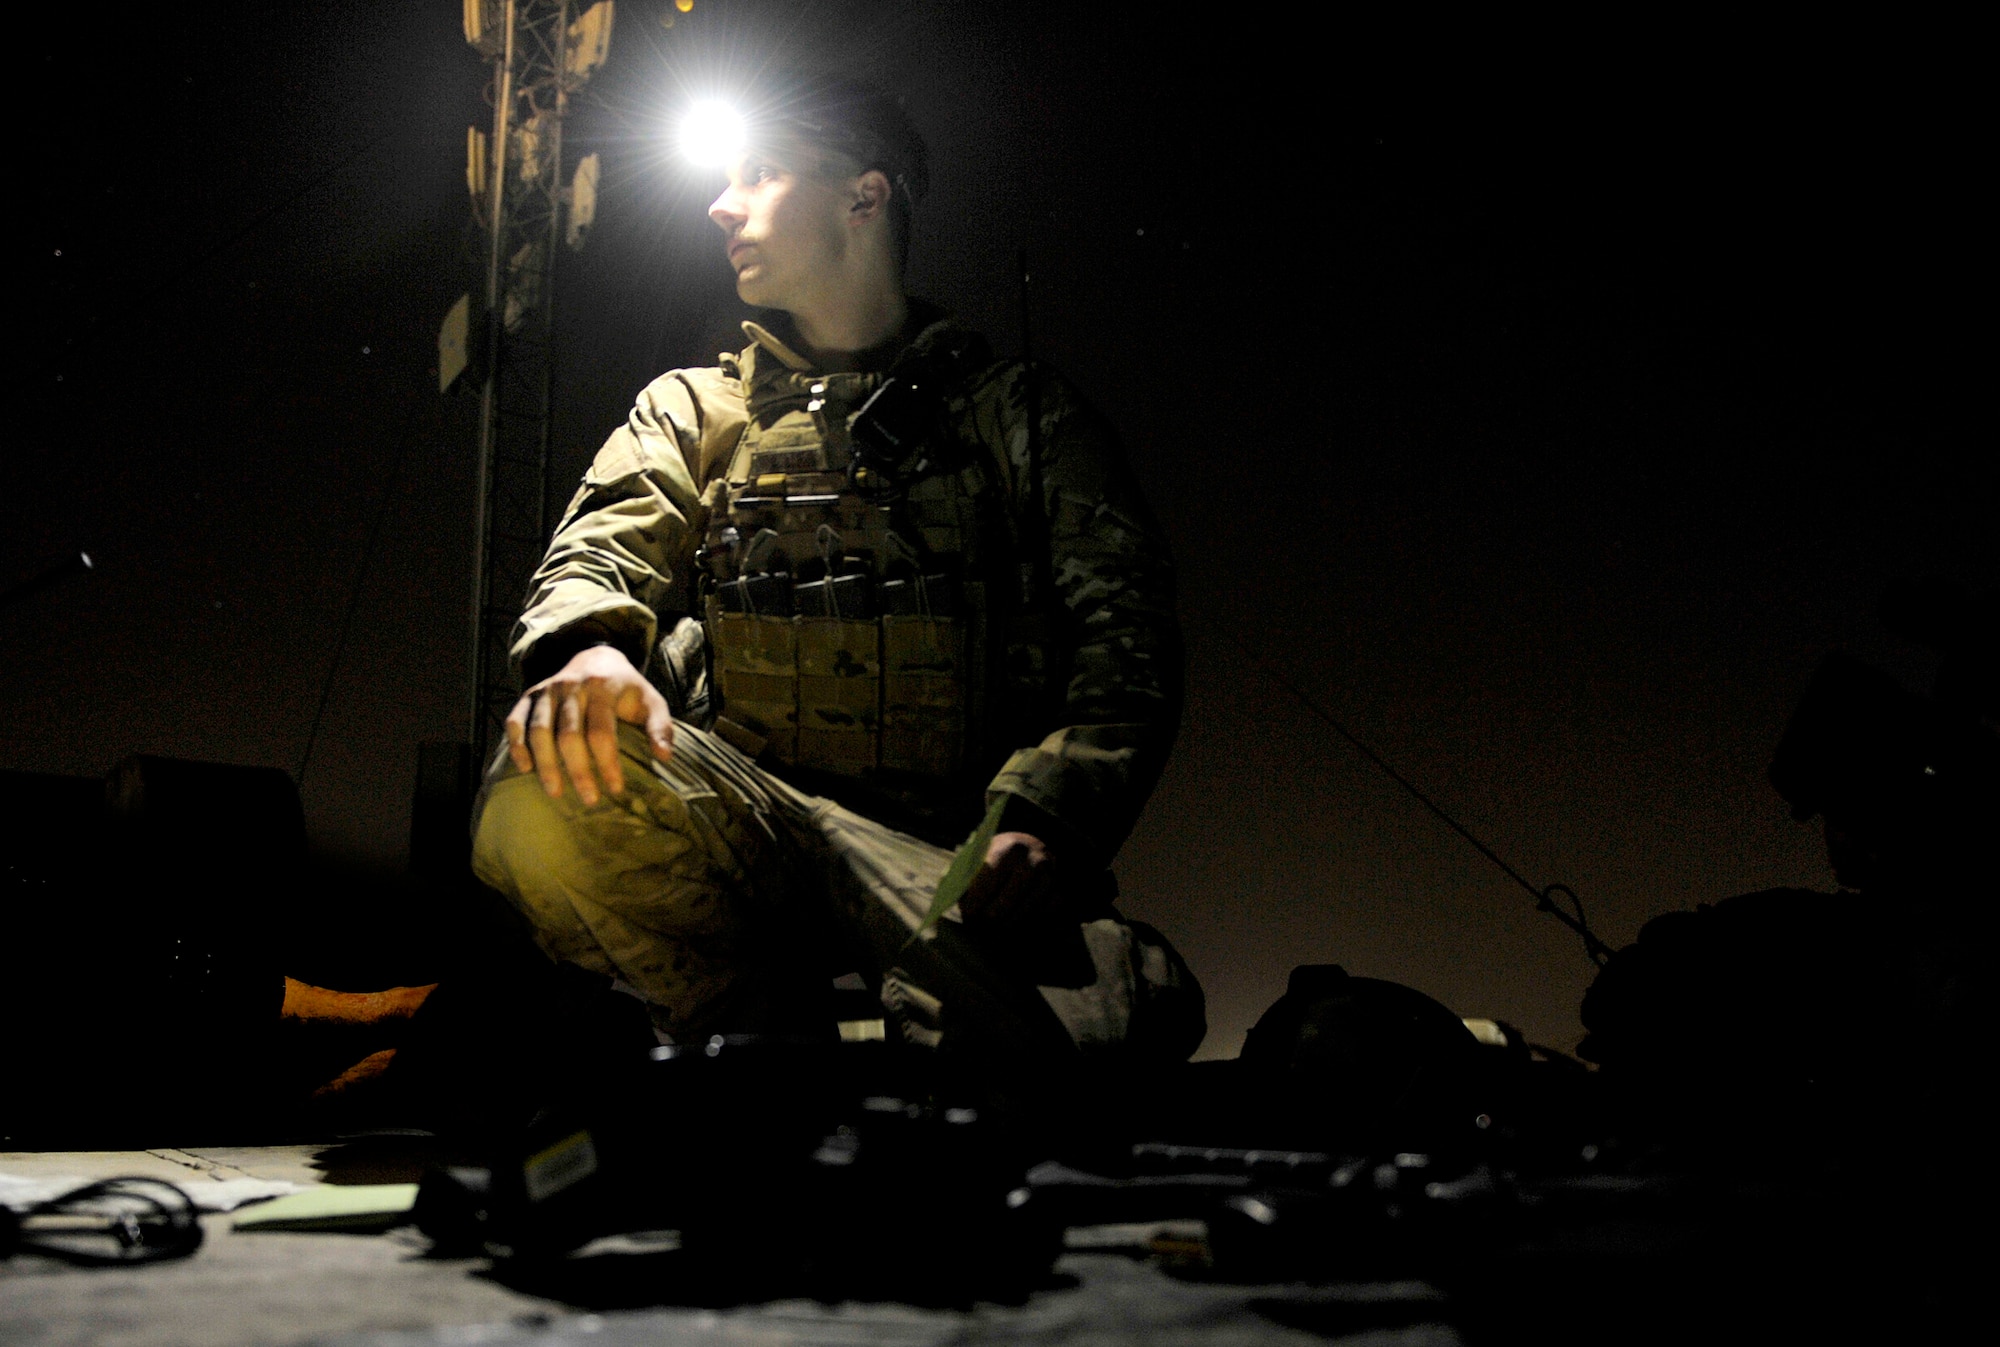 U.S. Air Force Senior Airman Caleb Mason, Tactical Air Control Party member, controls two A-10 Thunderbolts during close air support training at Forward Operating Base Fenty, Afghanistan, Oct. 11, 2012. Mason is also a Radio Operator, Maintainer, and Driver, where he is trained and metored by Joint Terminal Attack Controllers in an operational deployed environment before going to the JTAC qualification course. JTAC members provide ground forces with air superiority by controlling overhead aircraft that are able to deliver multiple weapons systems, as well as intelligence, surveillance, and reconnaissance capabilities. JTACs and ROMADs train and operate alongside their Army counterparts in order to prepare them for kinetic situations while outside the wire. (U.S. Air Force photo/Staff Sgt. Clay Lancaster)